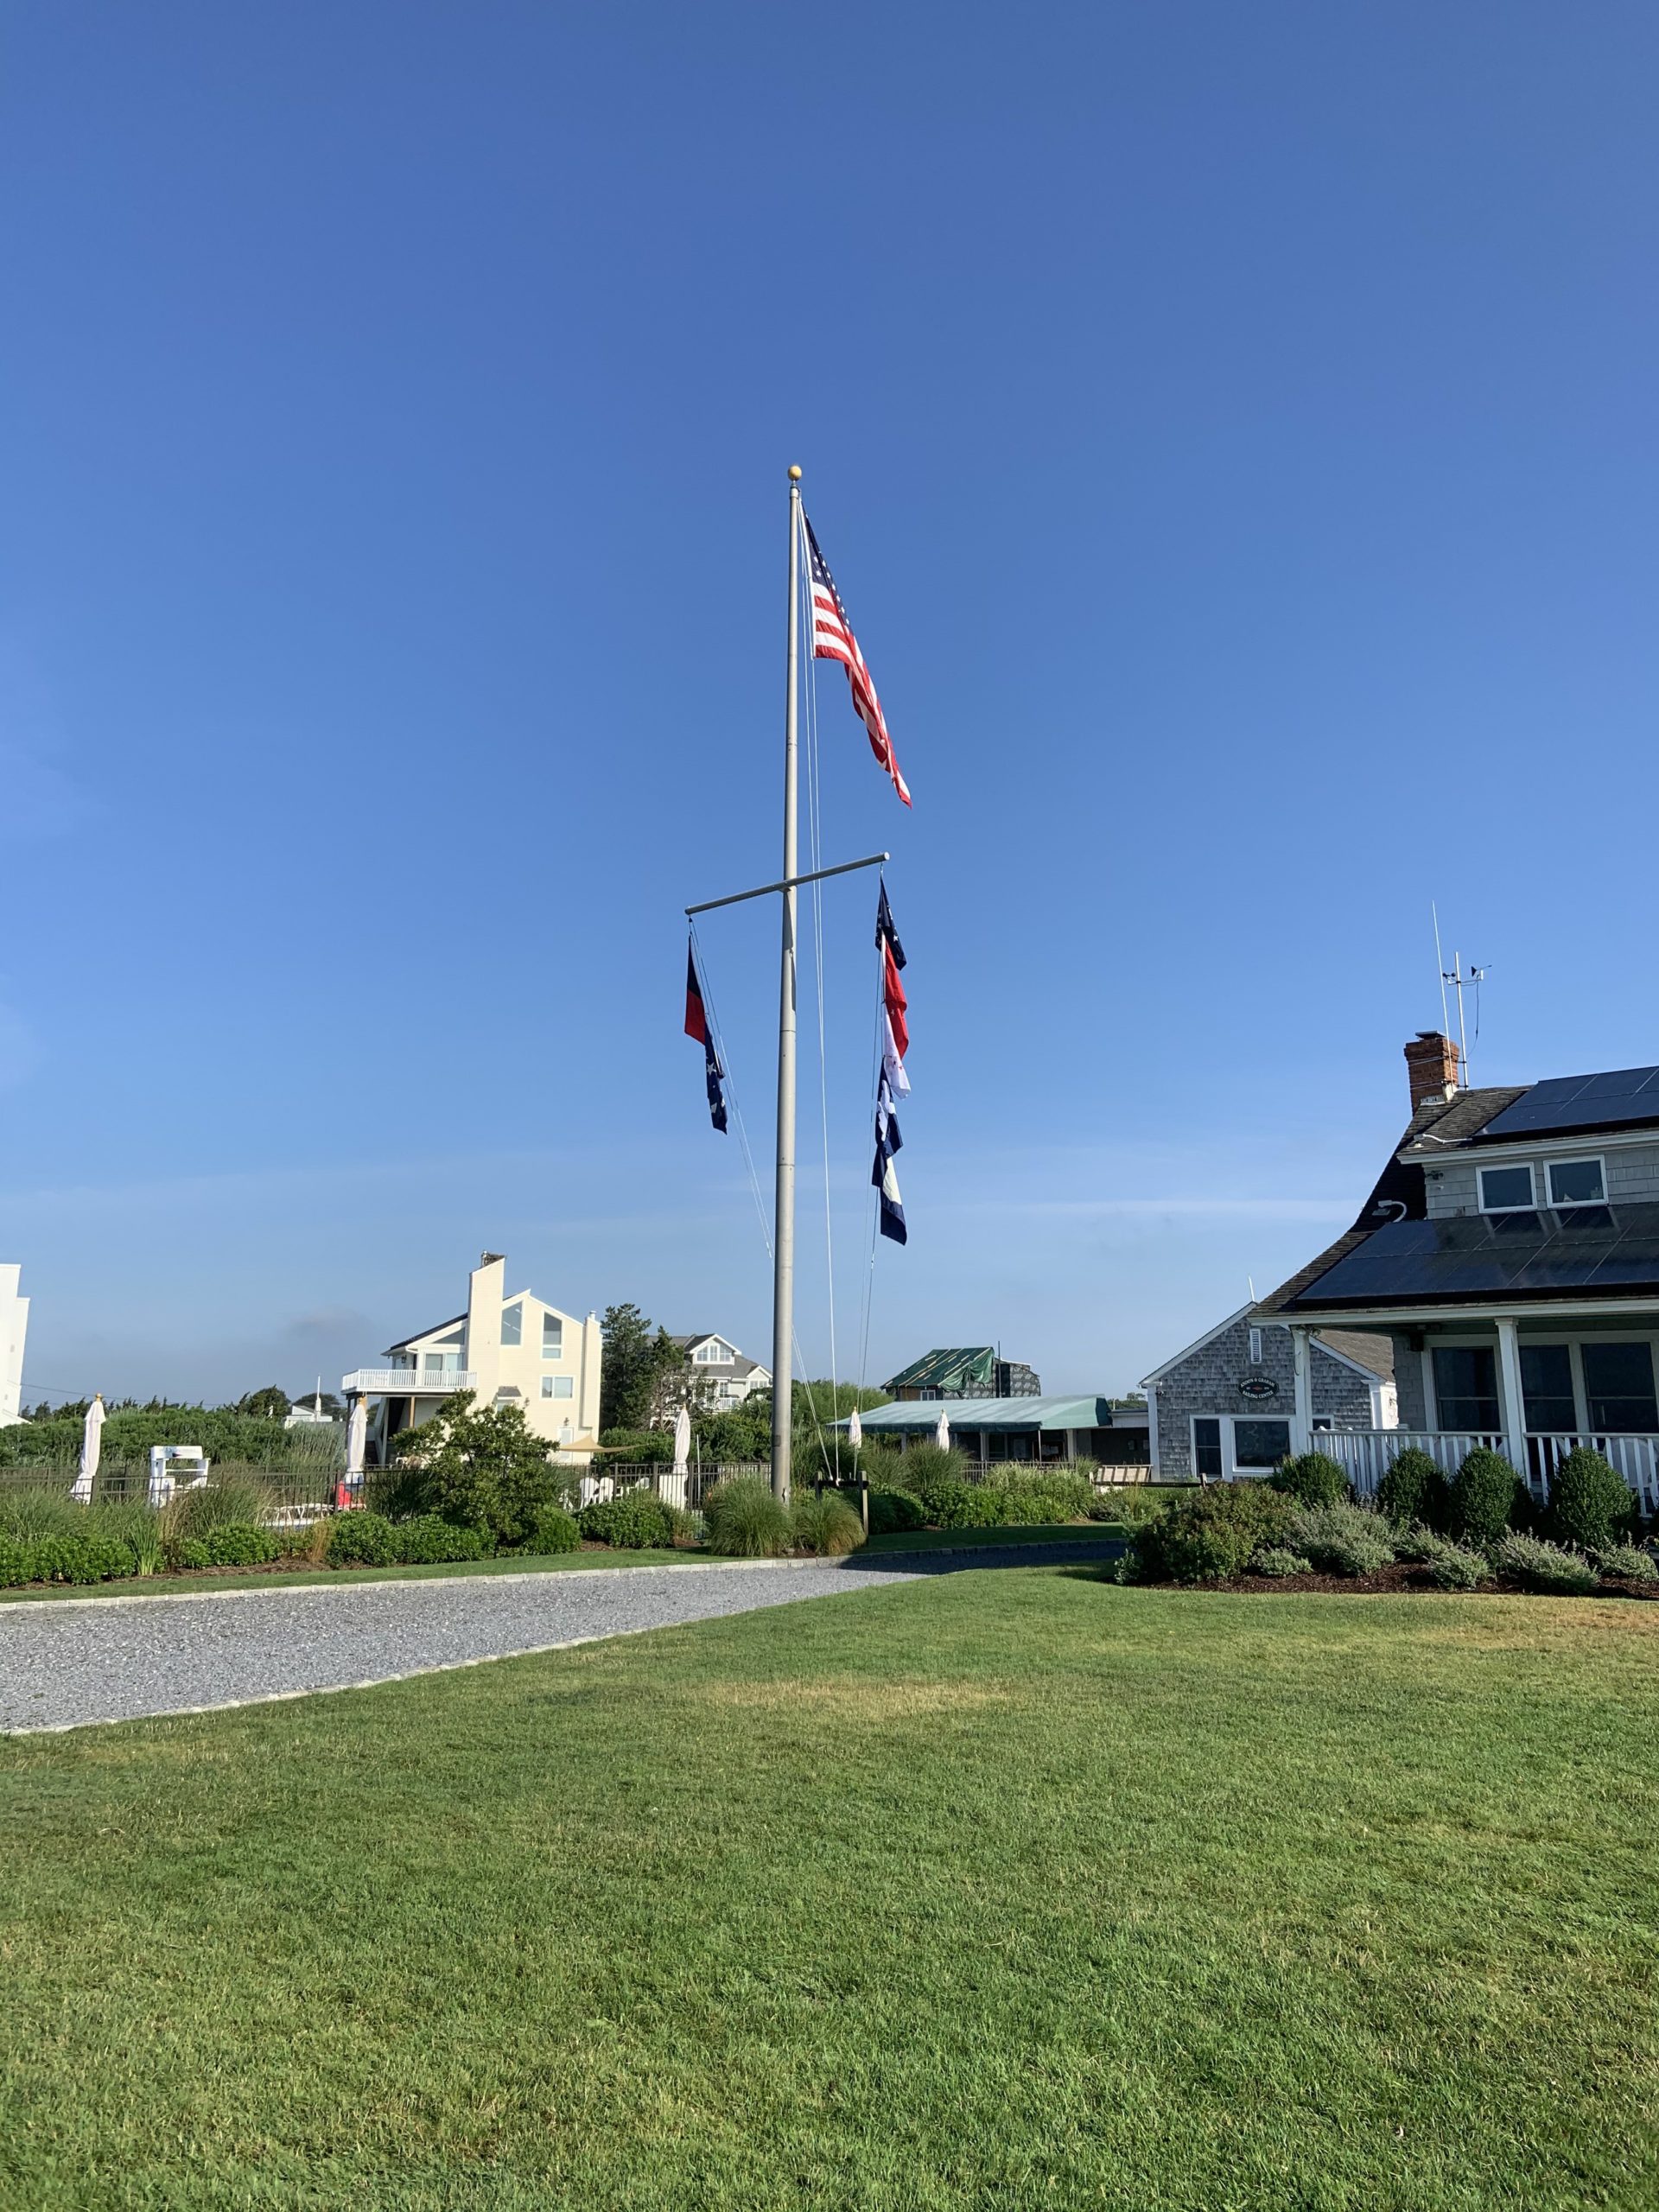 The flagpole and clubhouse at Westhampton Yacht Squadron.